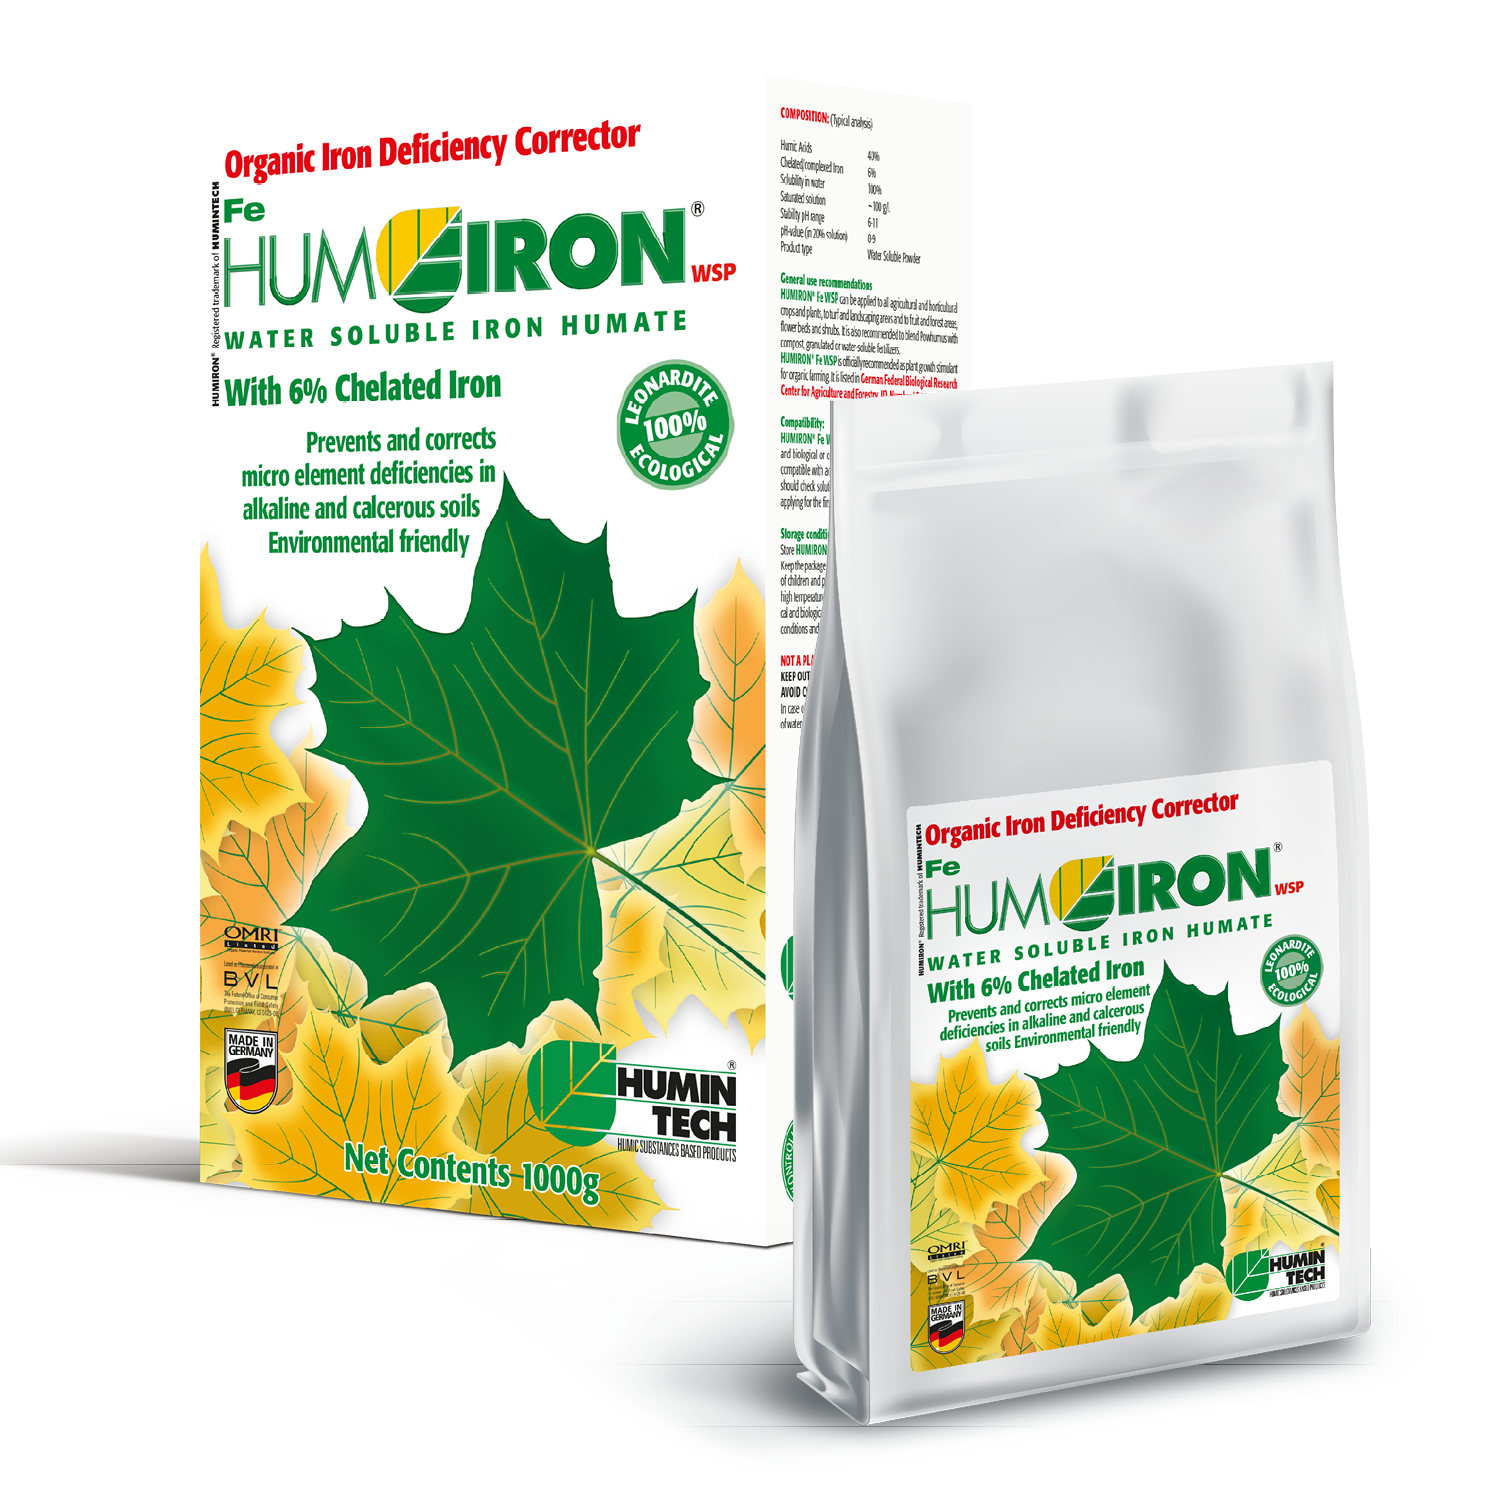 HUMIRON Fe WSP Organic Iron Deficiency Corrector Iron Humate with 6% Chelated and Complexed Iron